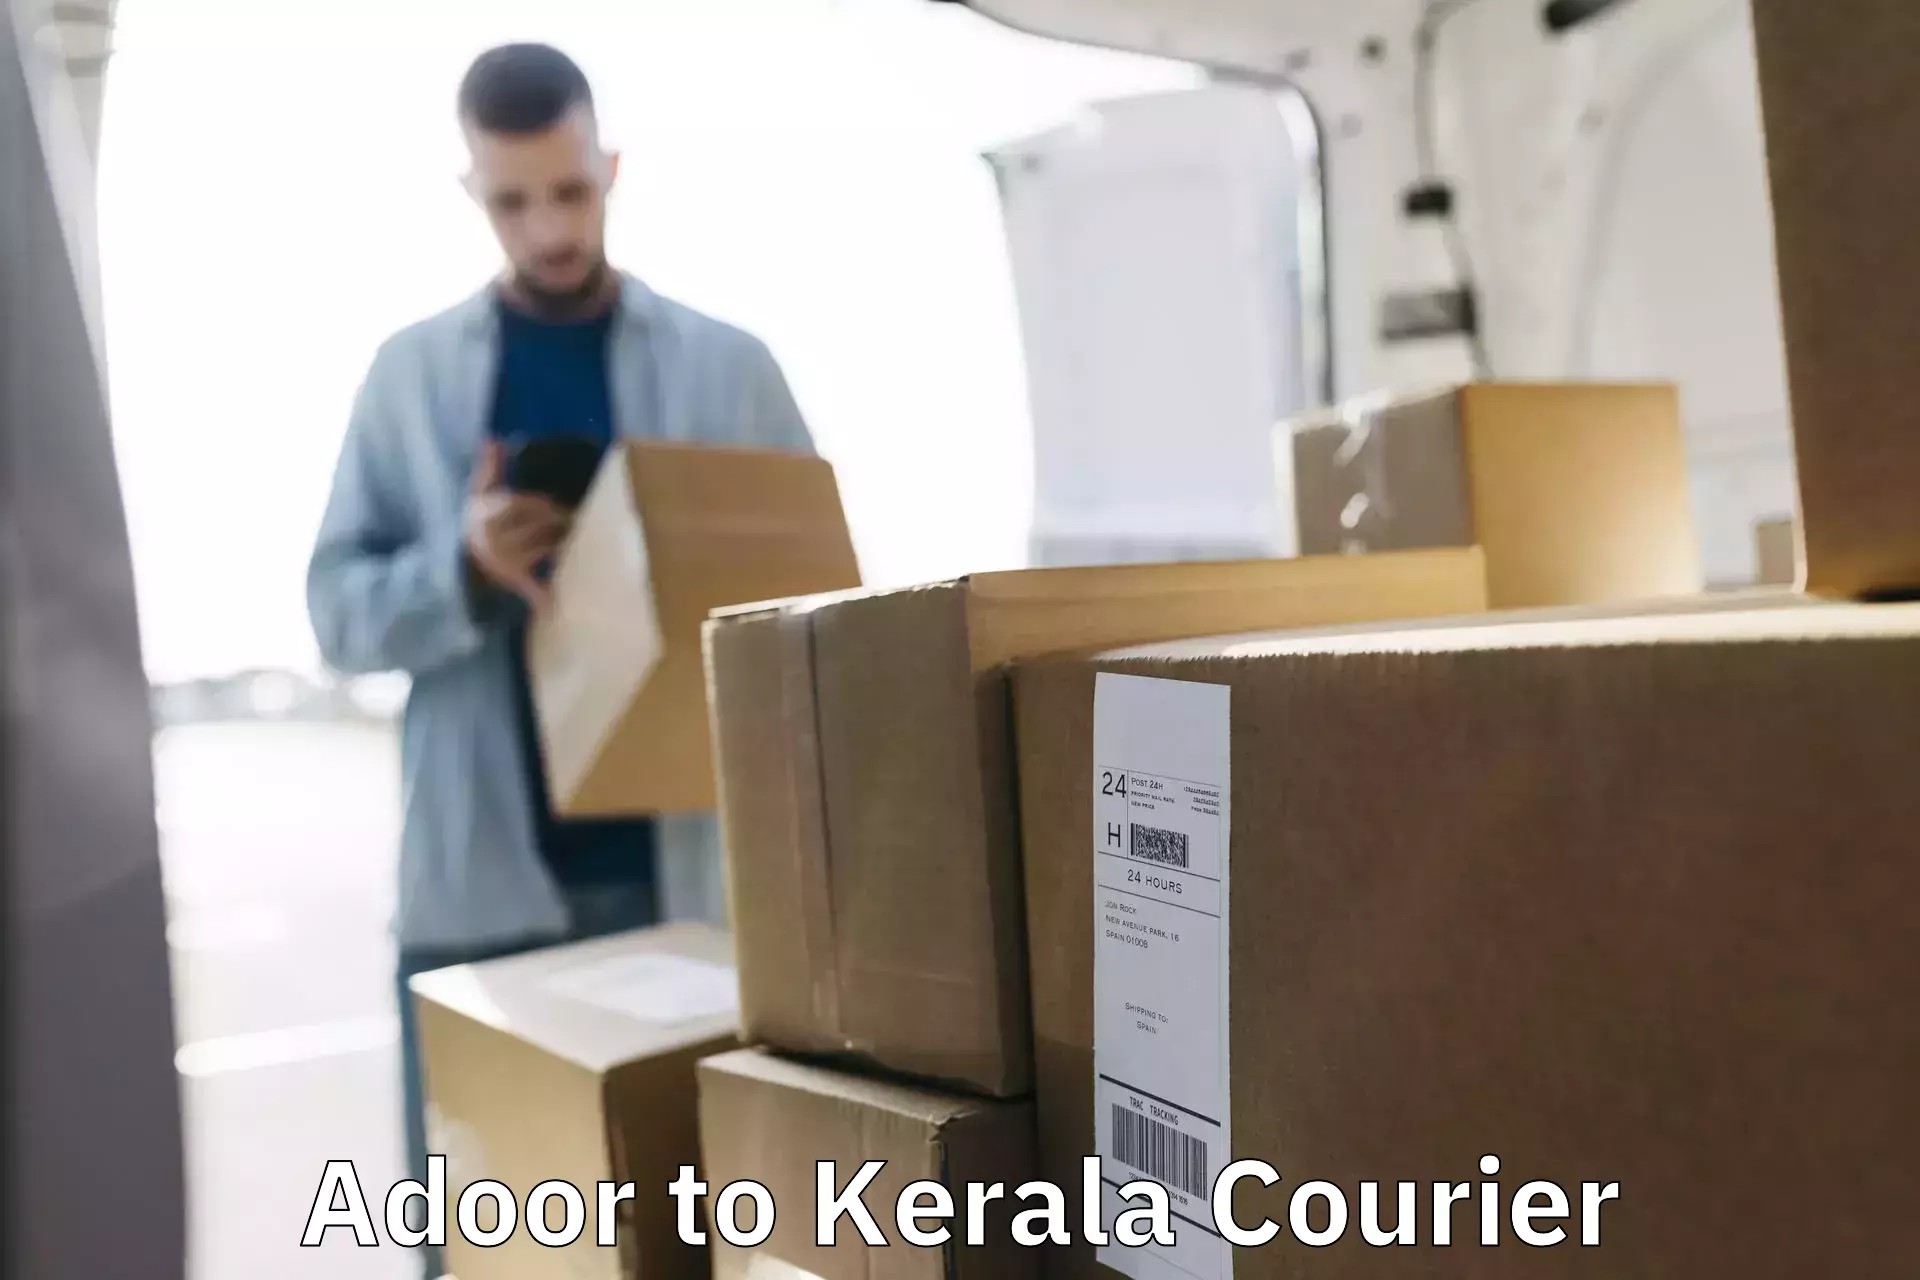 Seamless shipping experience Adoor to Allepey